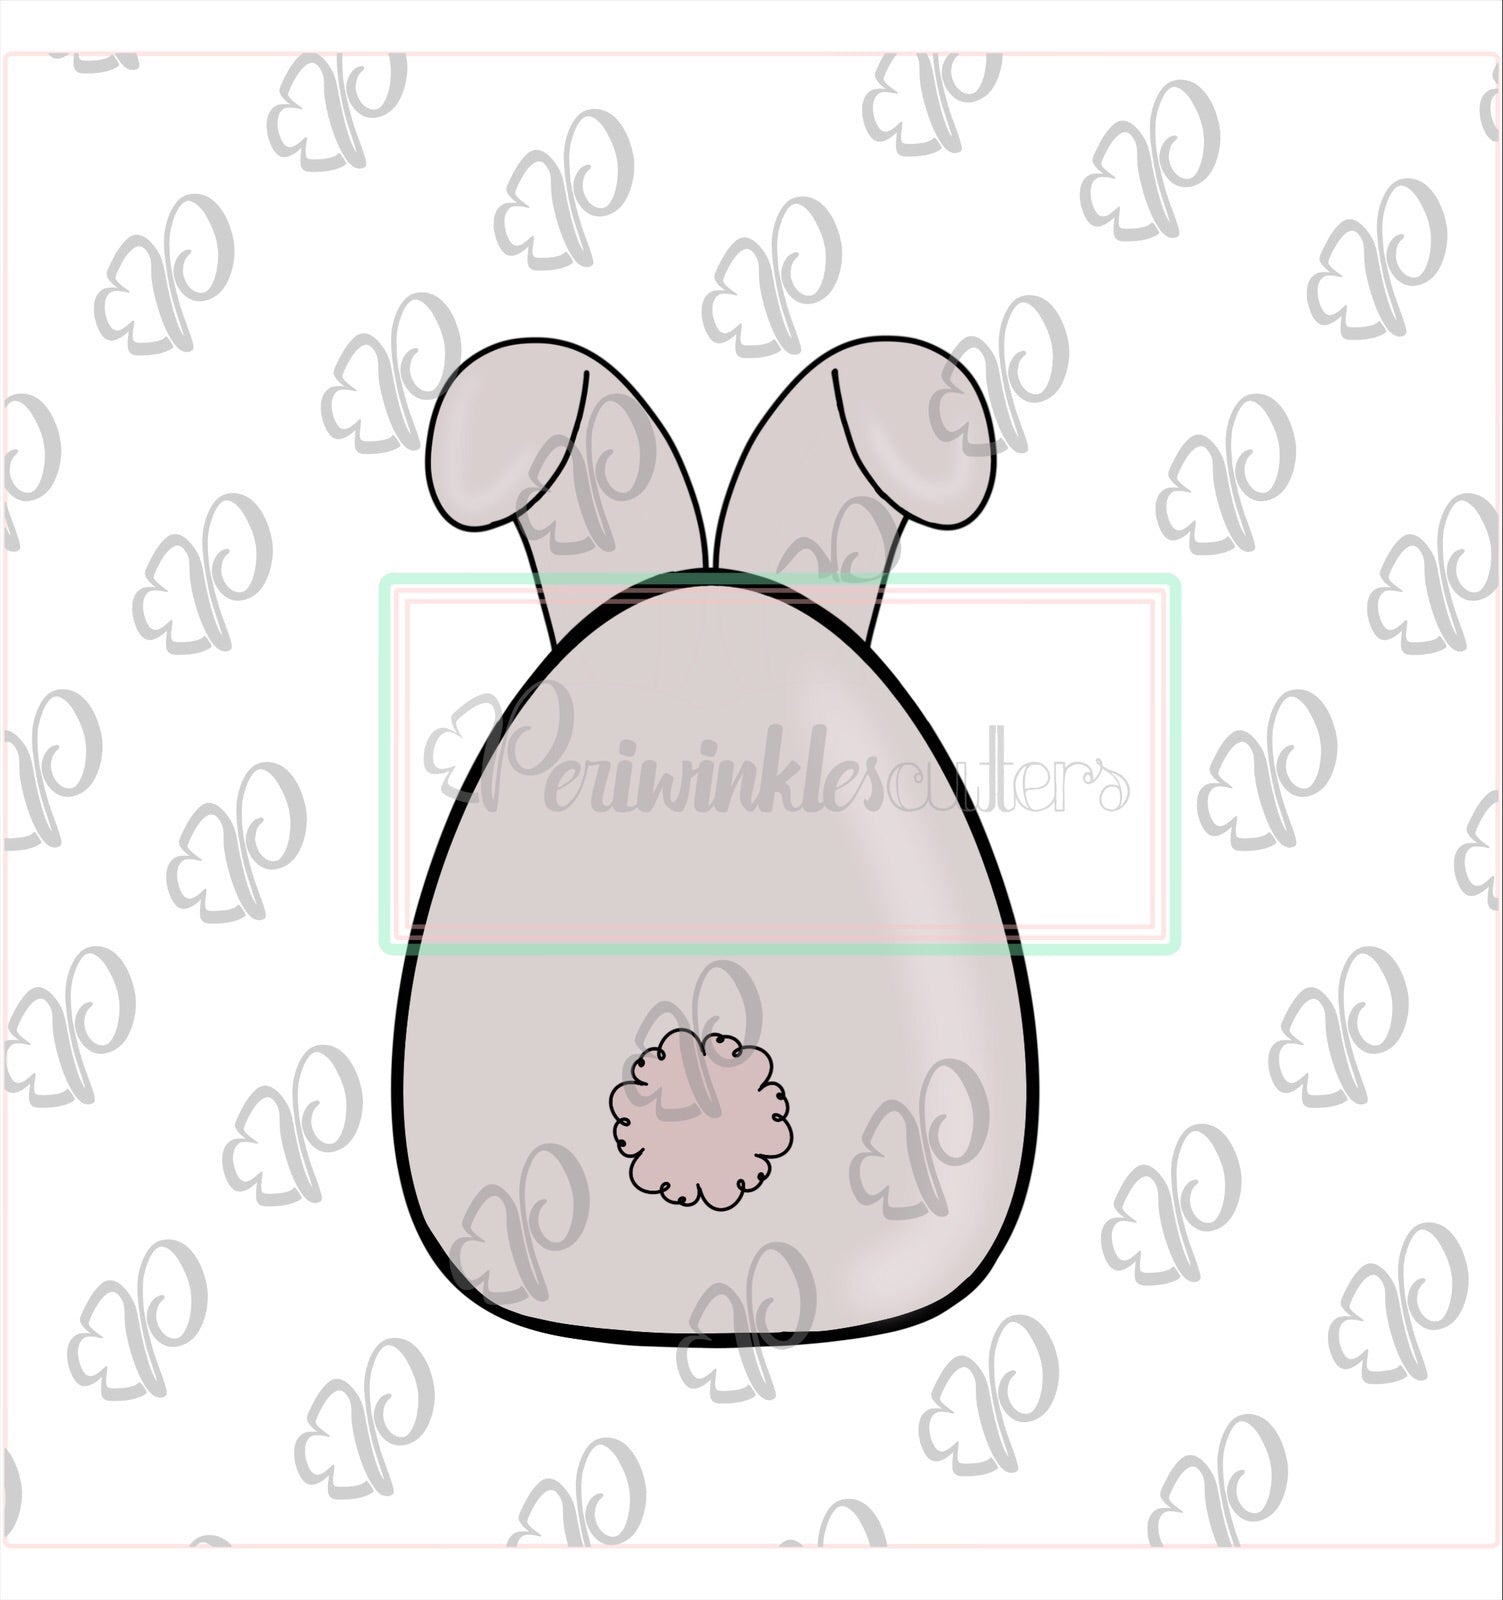 Cute Oval Bunny Cookie Cutter - Periwinkles Cutters